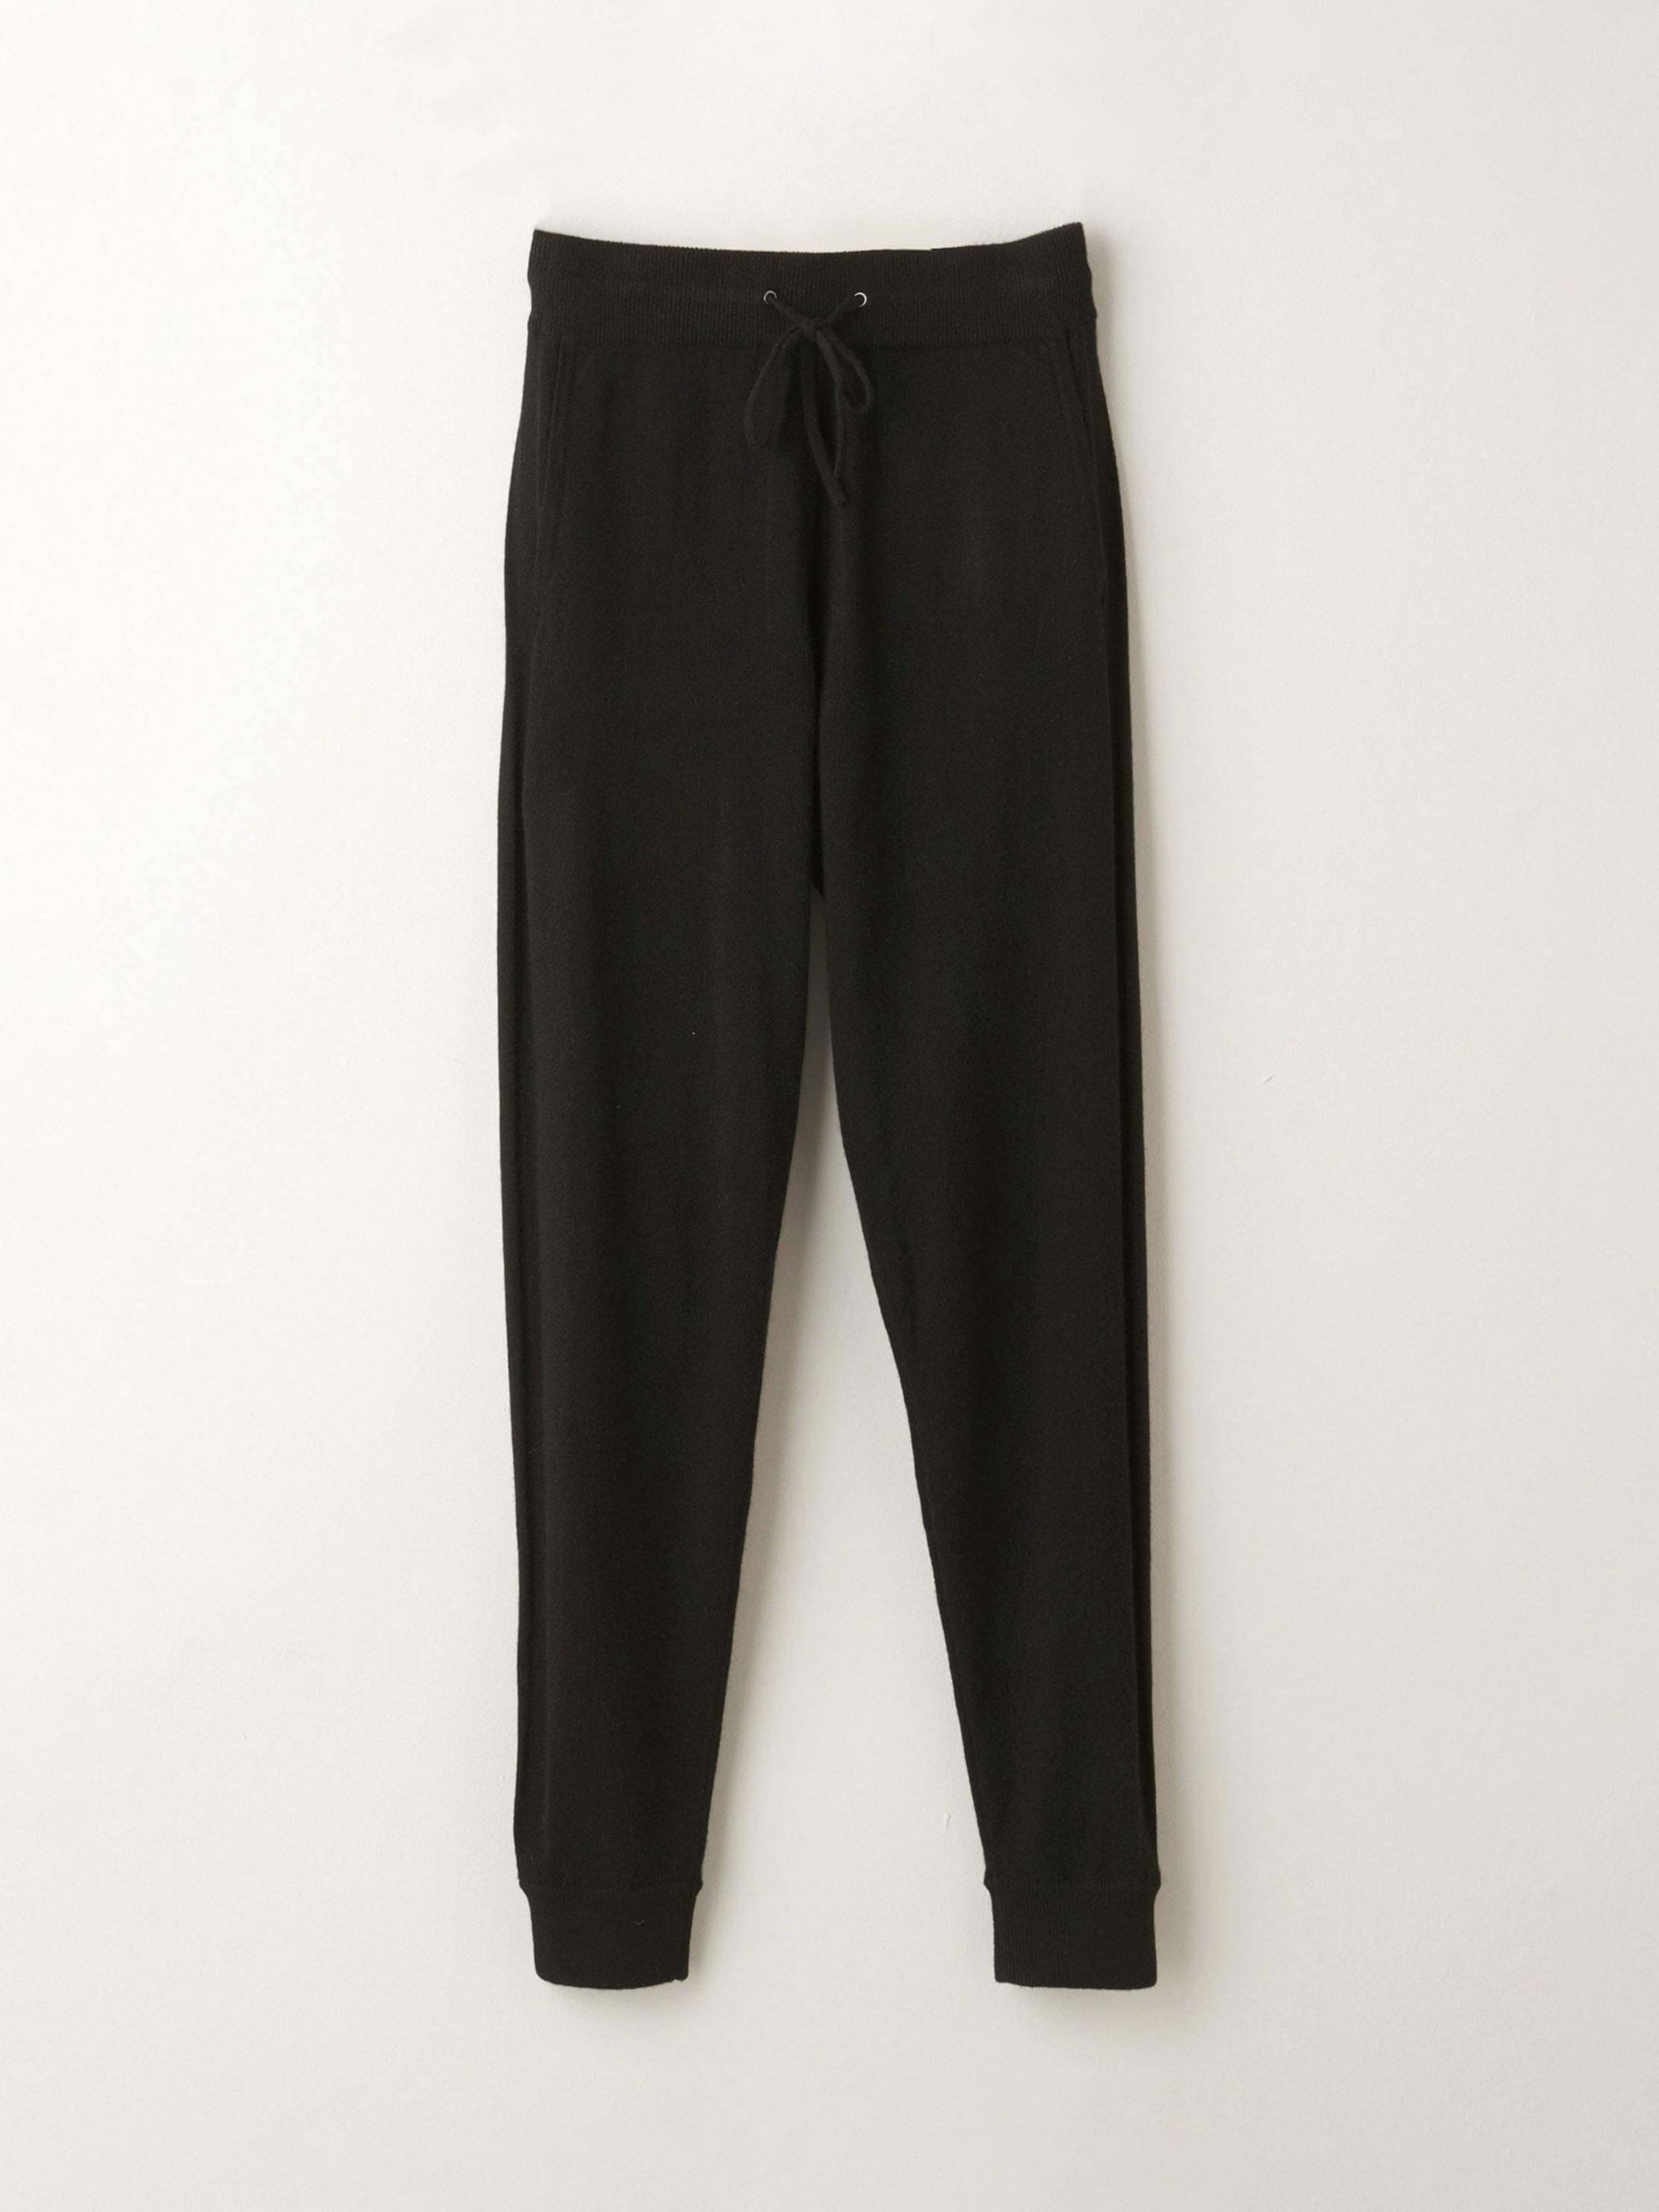 Truly Cashmere Joggers, Black at John Lewis & Partners